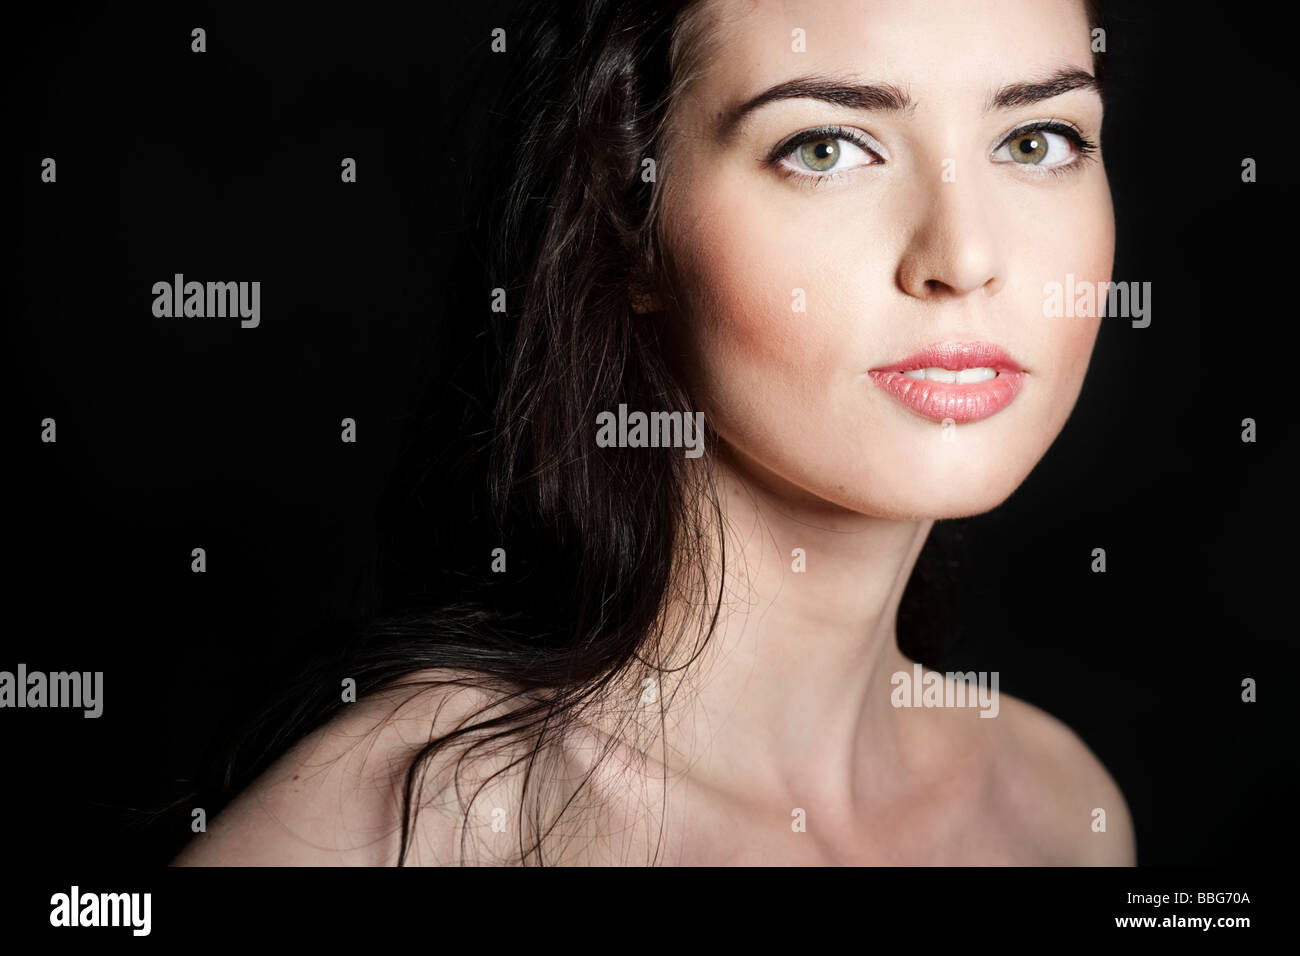 Portrait of a young, dark-haired woman in front of black backdrop Stock Photo